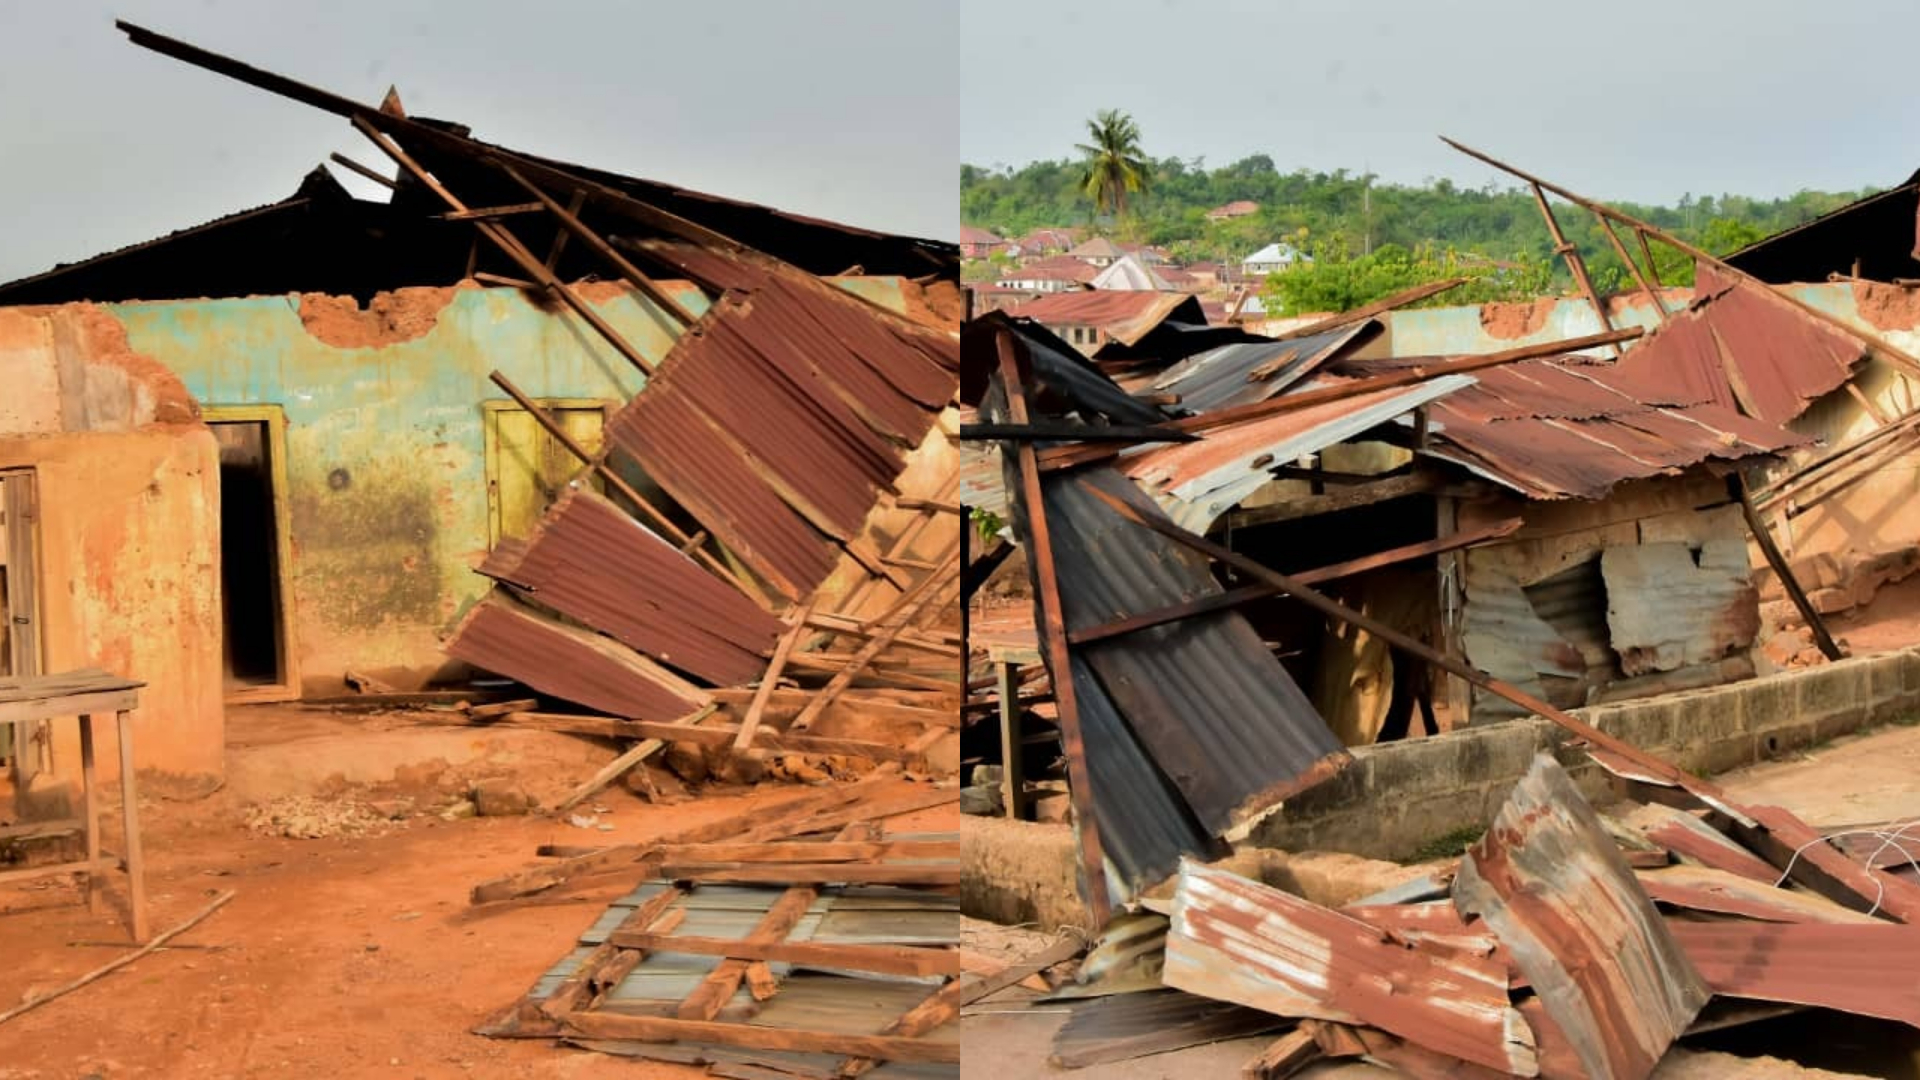 Over the weekend, torrential rain and high winds wrecked havoc in Ilara-Mokin, Ifedore Local Government Area, Ondo State, destroying over 100 structures.